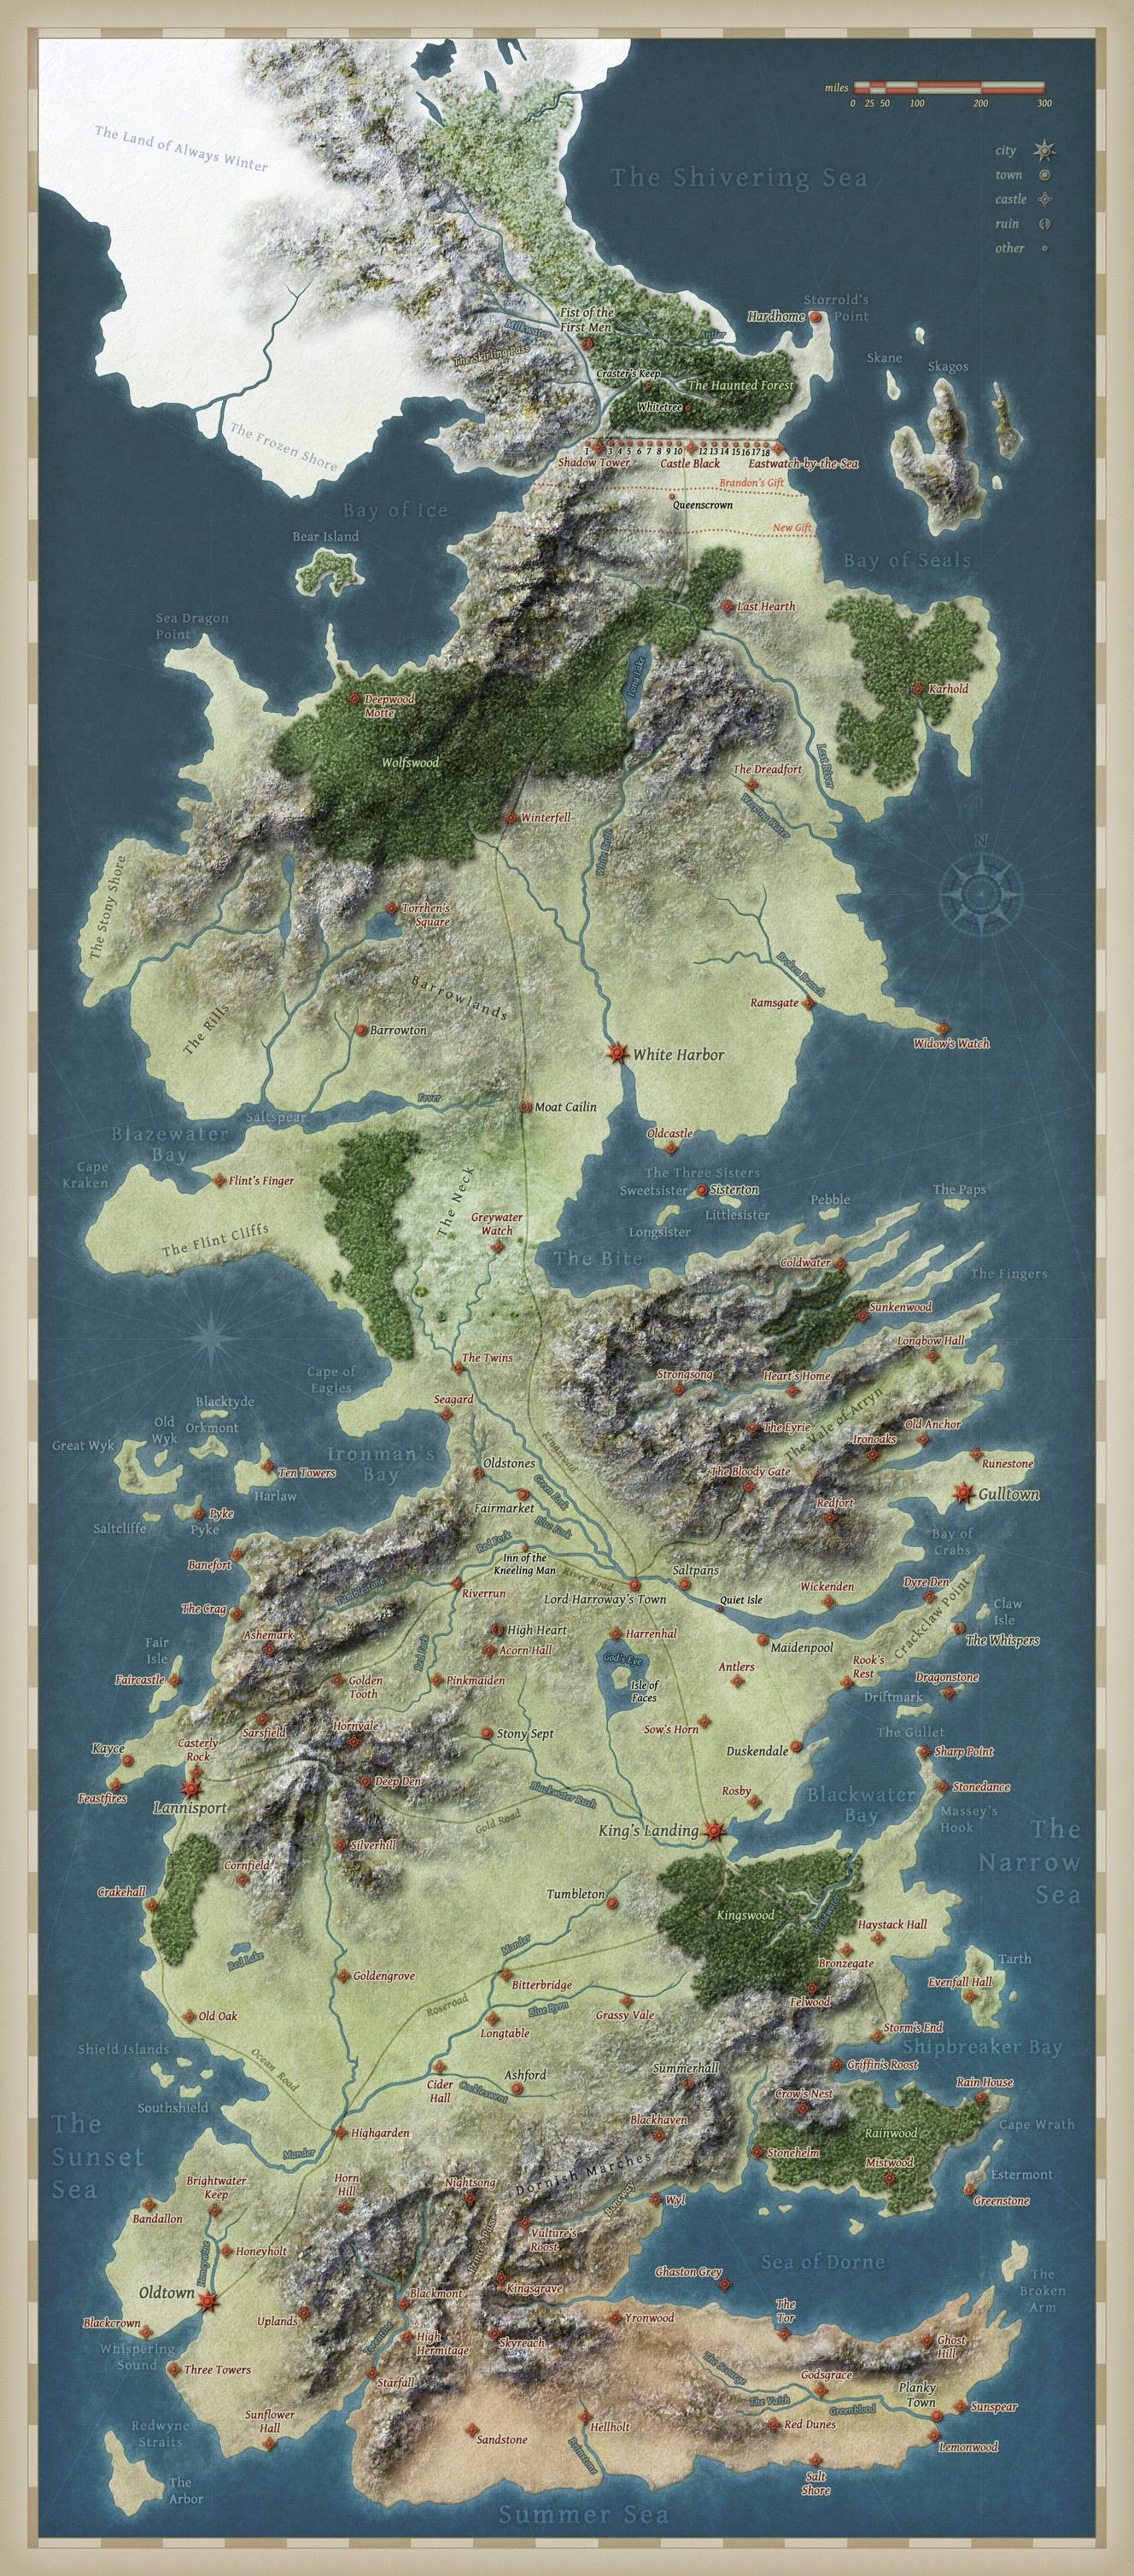 🔥 #westeros map HD Photos & Wallpapers (225+ Images) - Page: 8